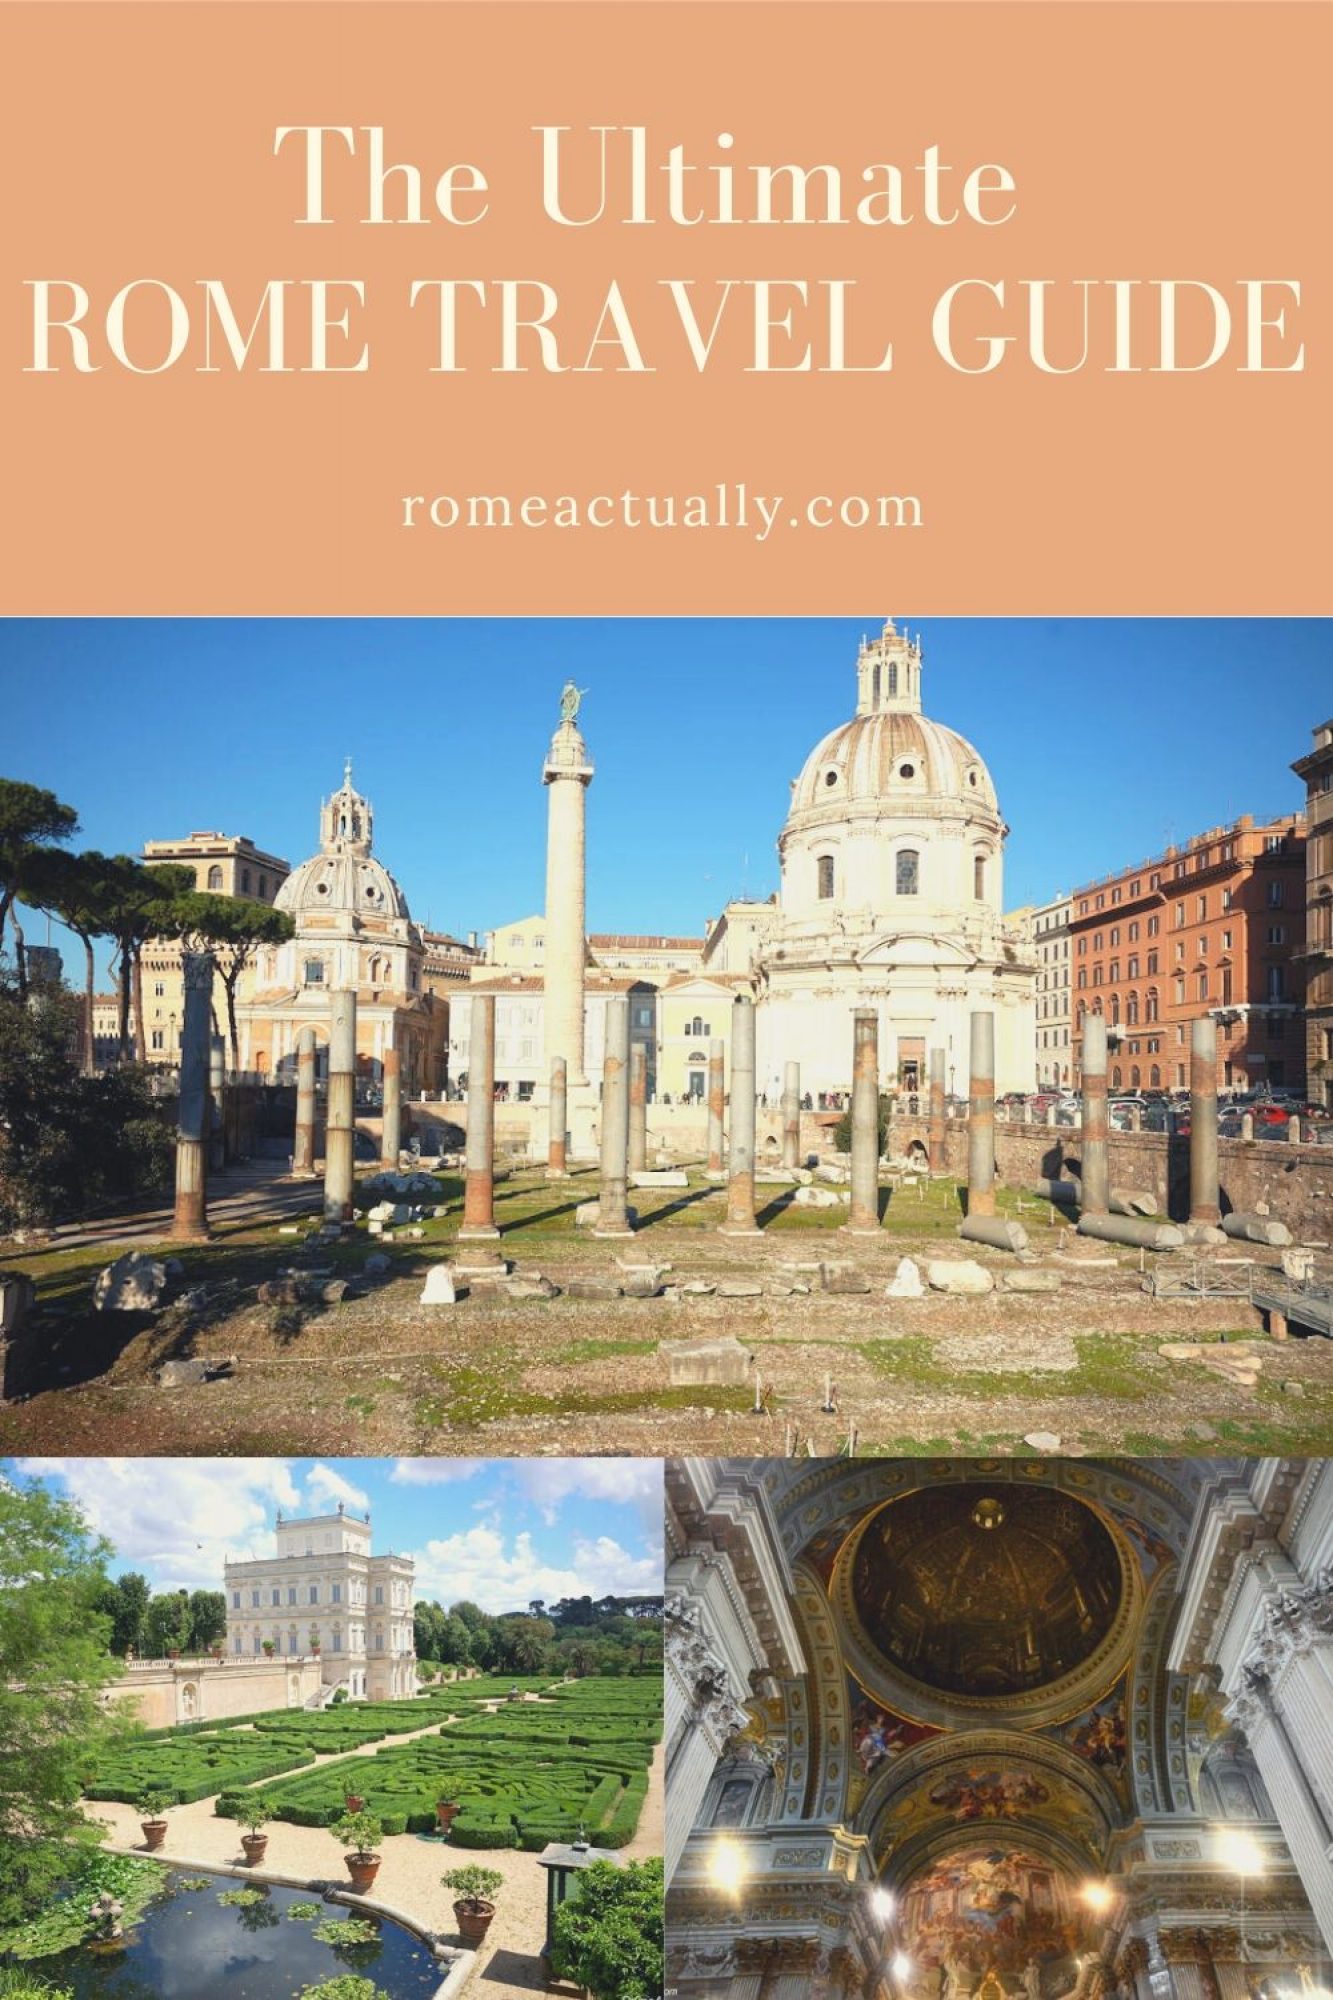 rome city tourist attractions